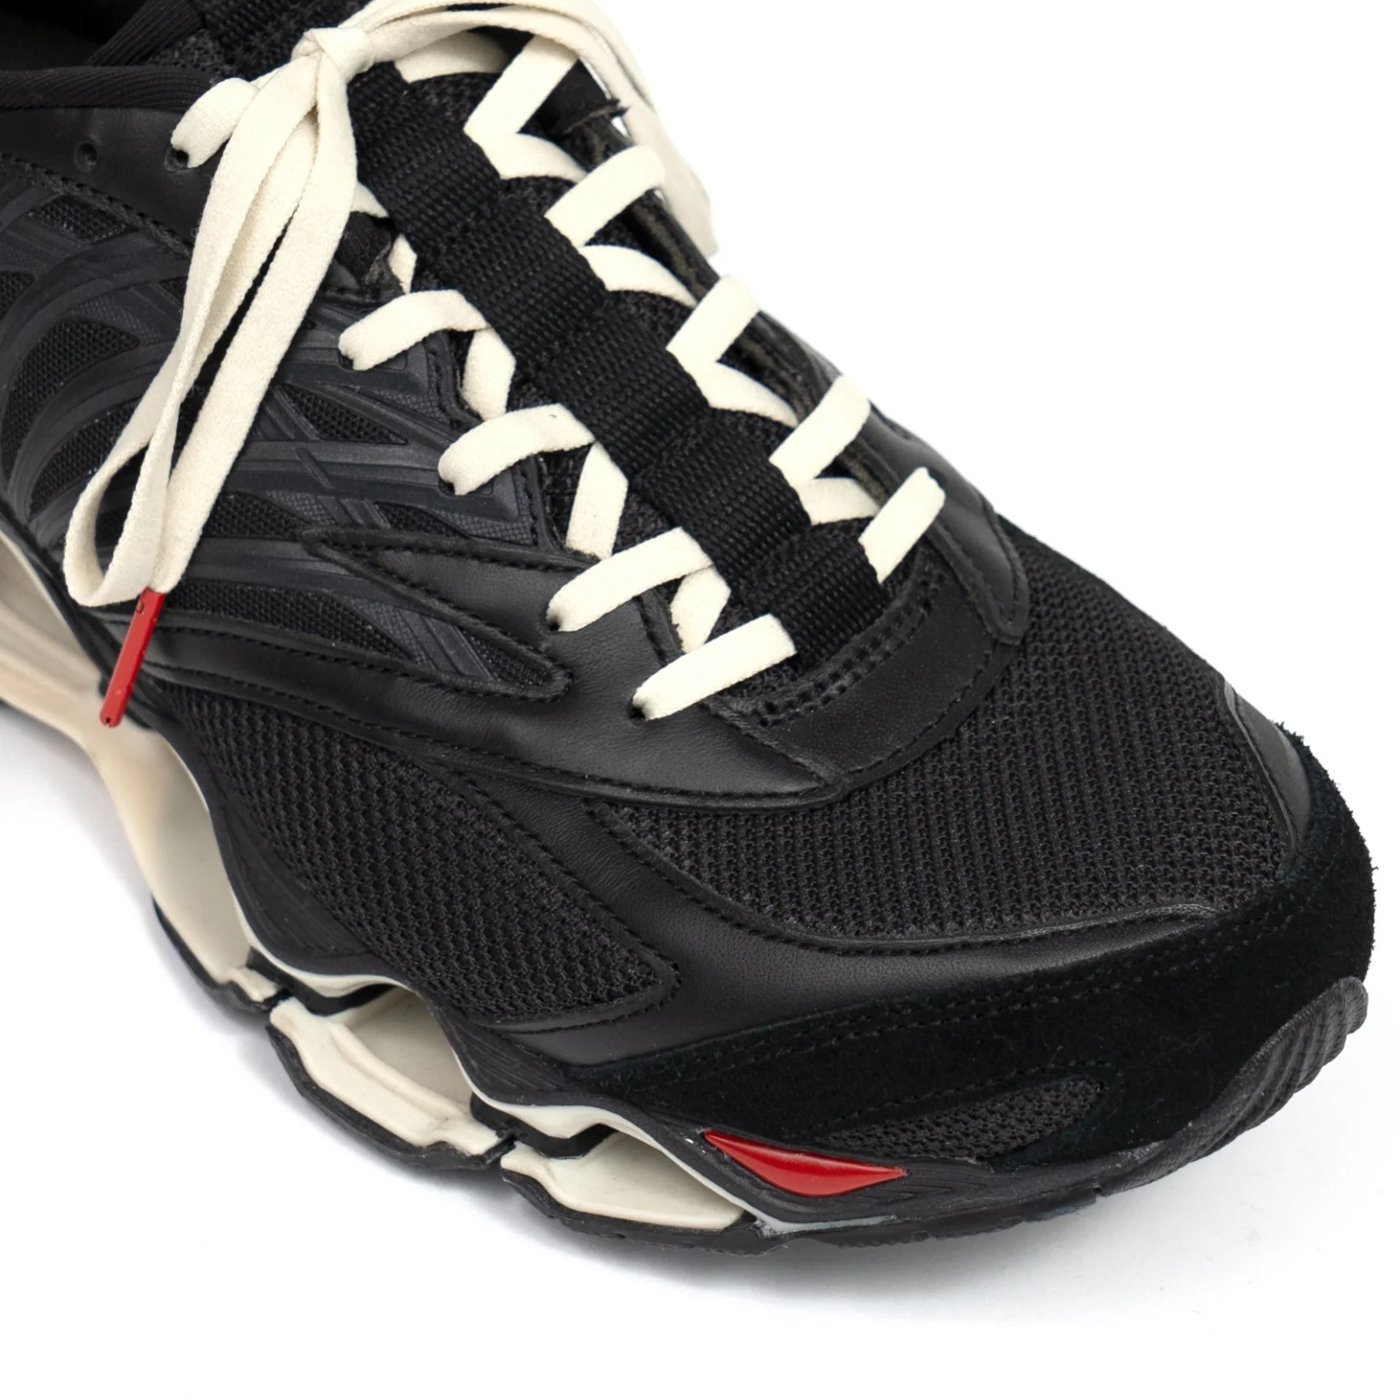 Graphpaper * MIZUNO WAVE PROPHECY LS for 